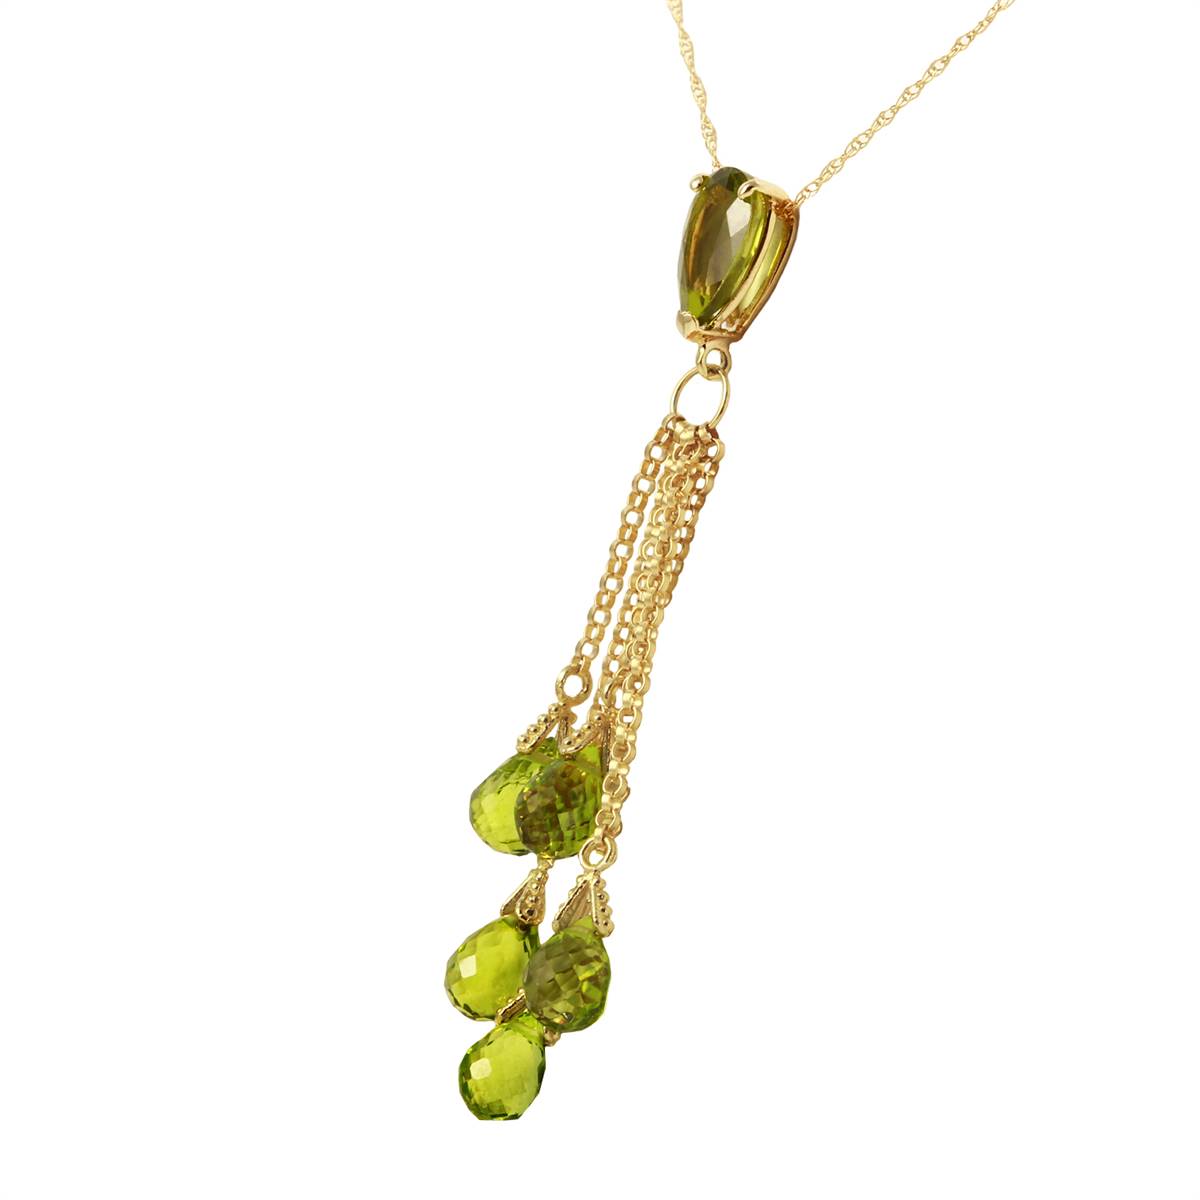 7.5 Carat 14K Solid Yellow Gold Necklace Briolette Peridot